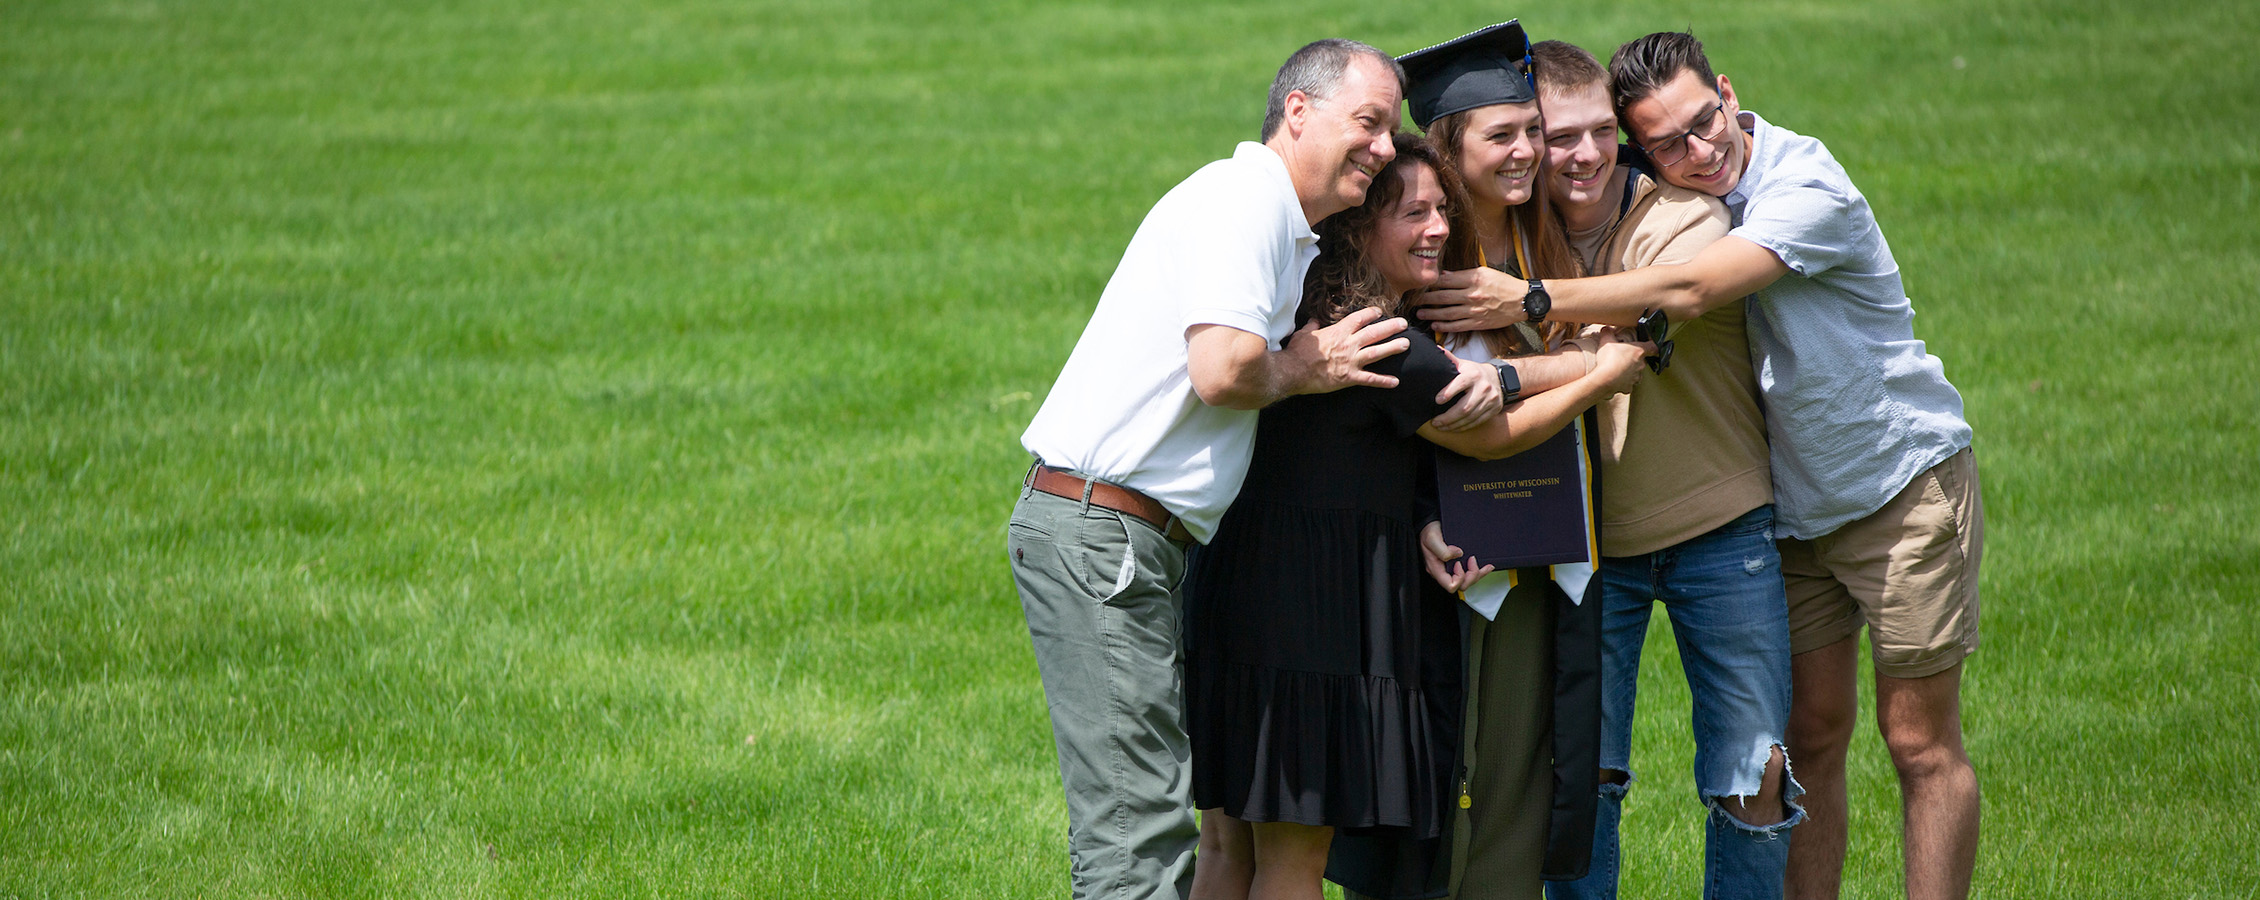 UW-Whitewater students celebrates graduation with her family